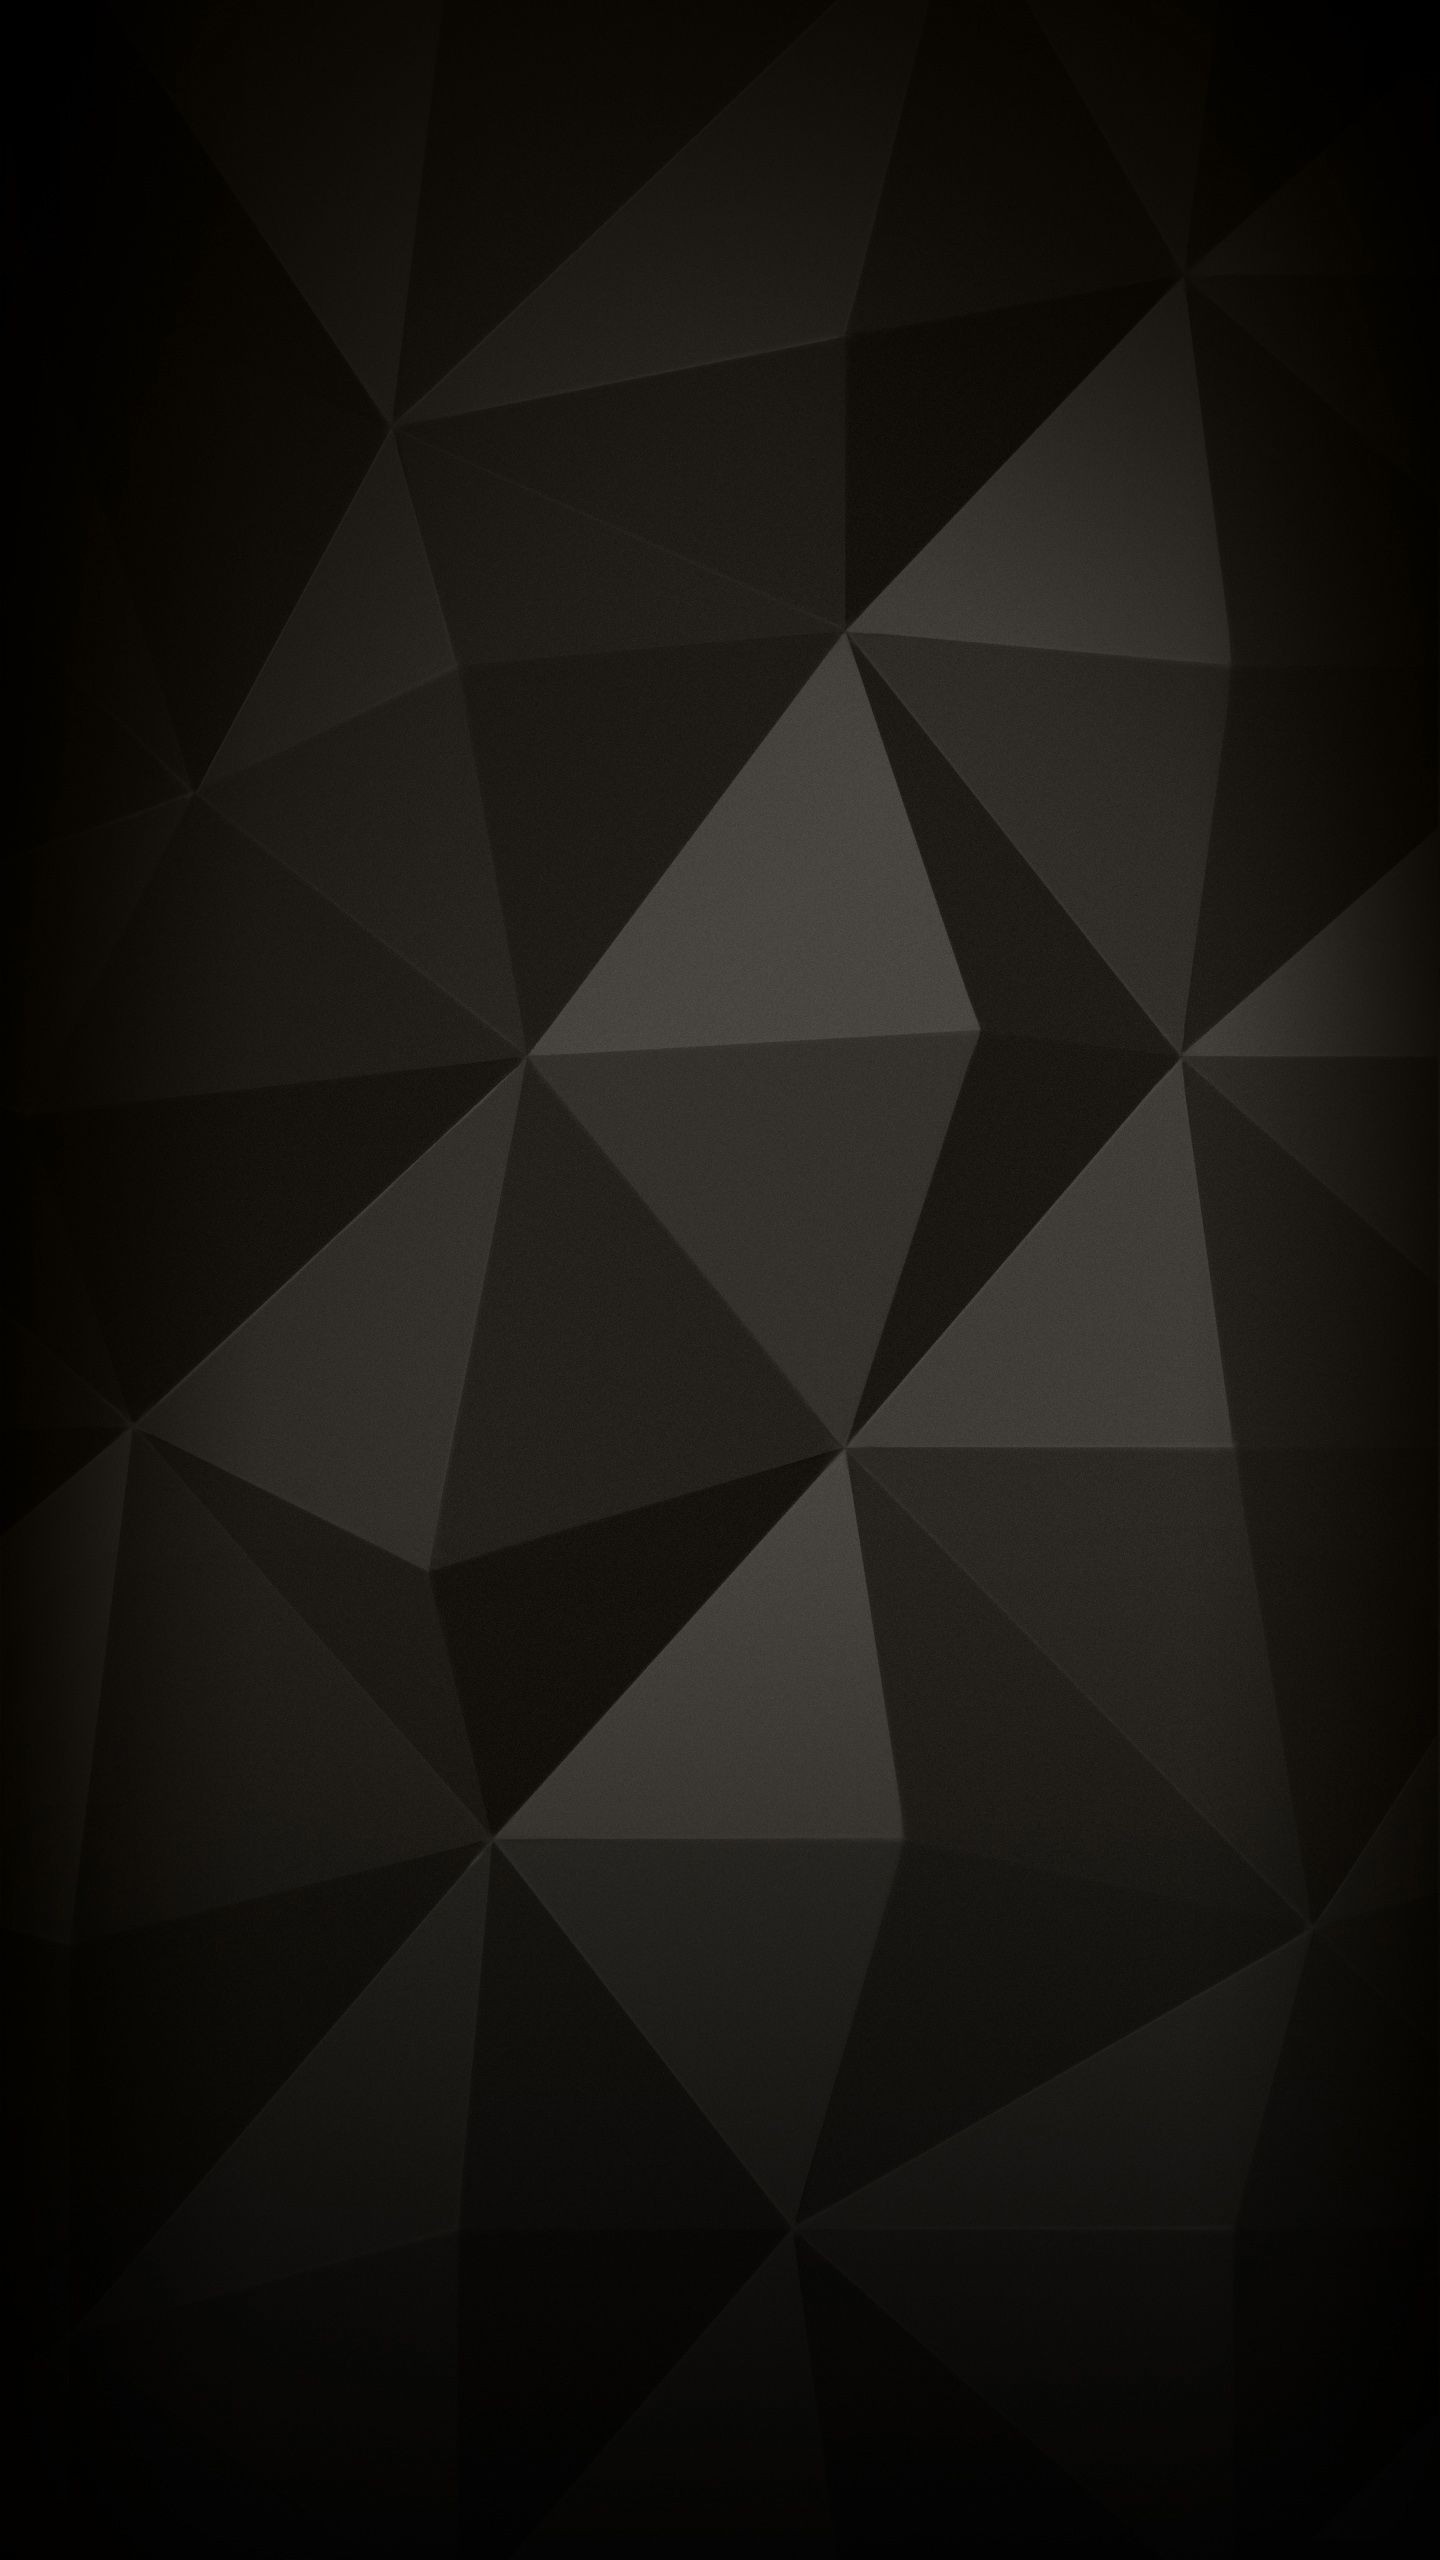 Black phone wallpaper ·① Download free beautiful High Resolution wallpapers for desktop and